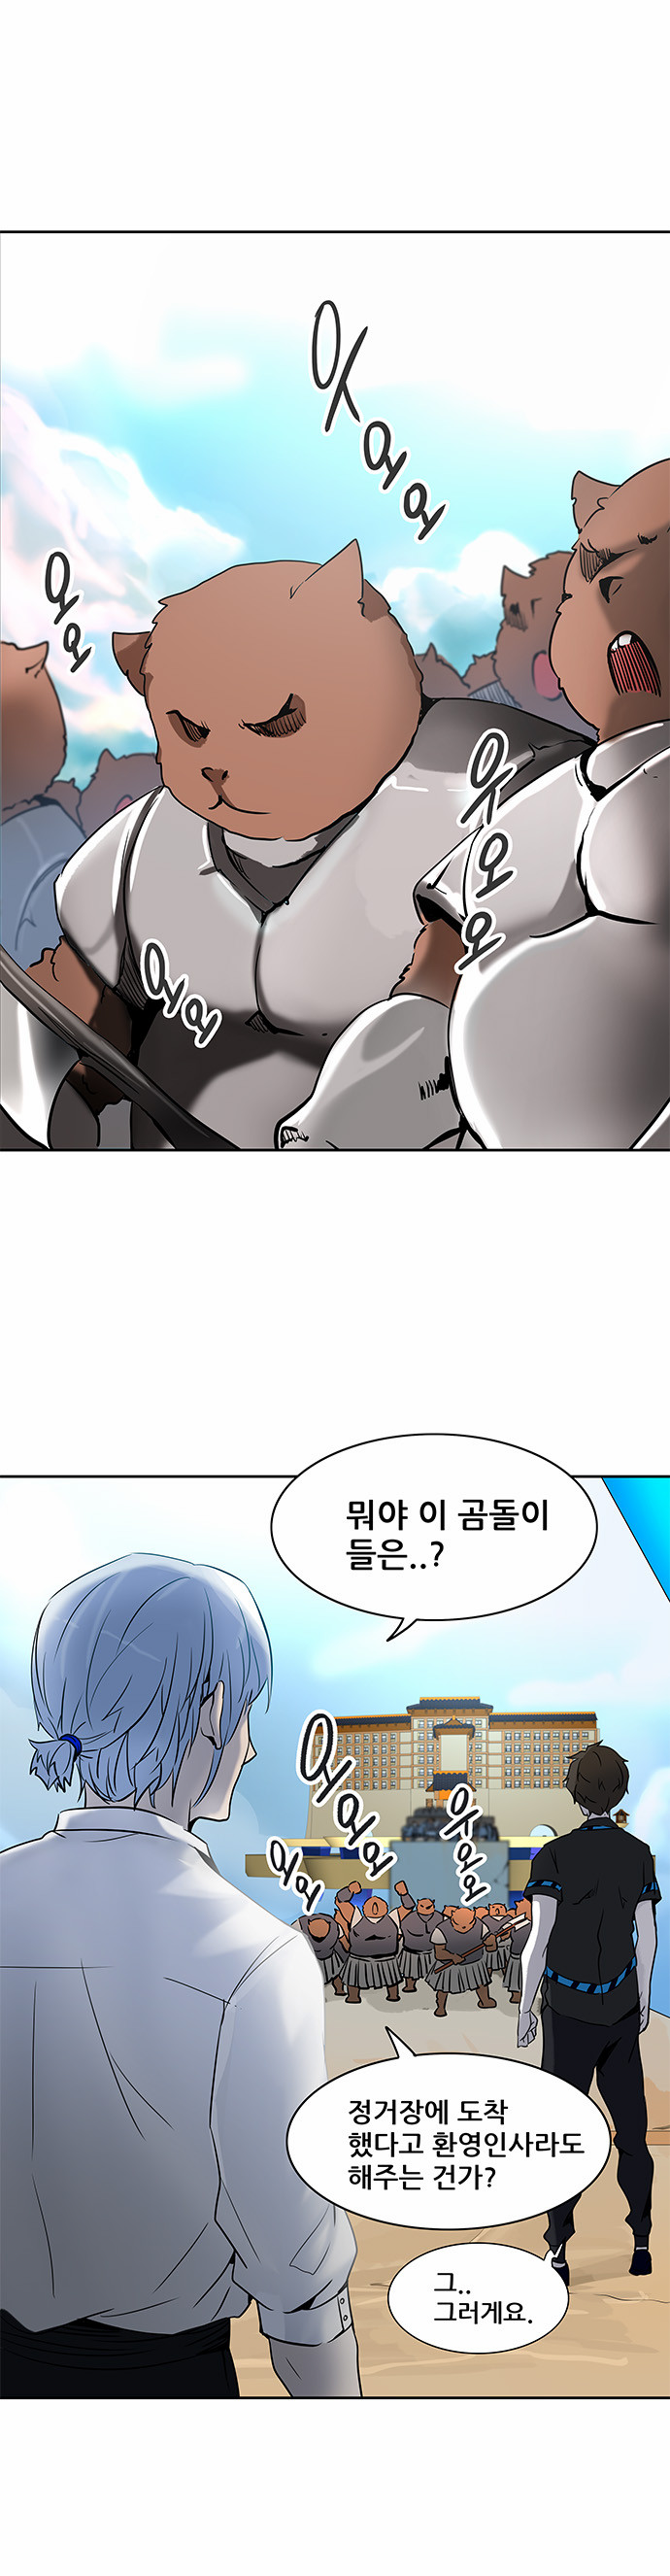 Tower of God - Chapter 285 - Page 1